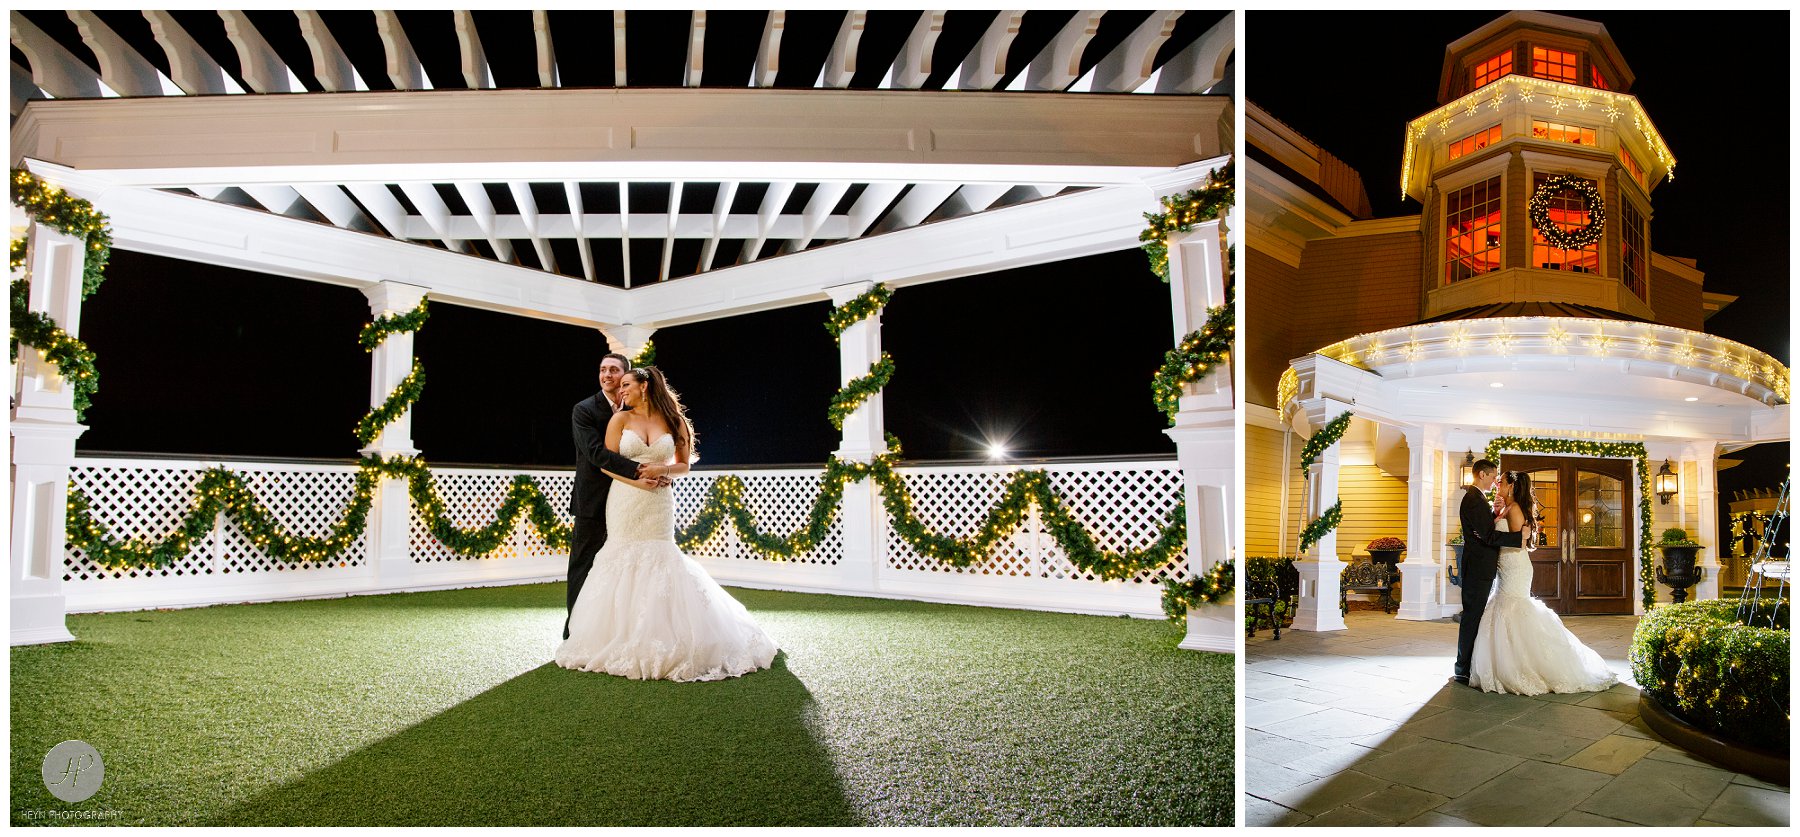 end of the night outdoor bride and groom at clarks landing yacht club wedding